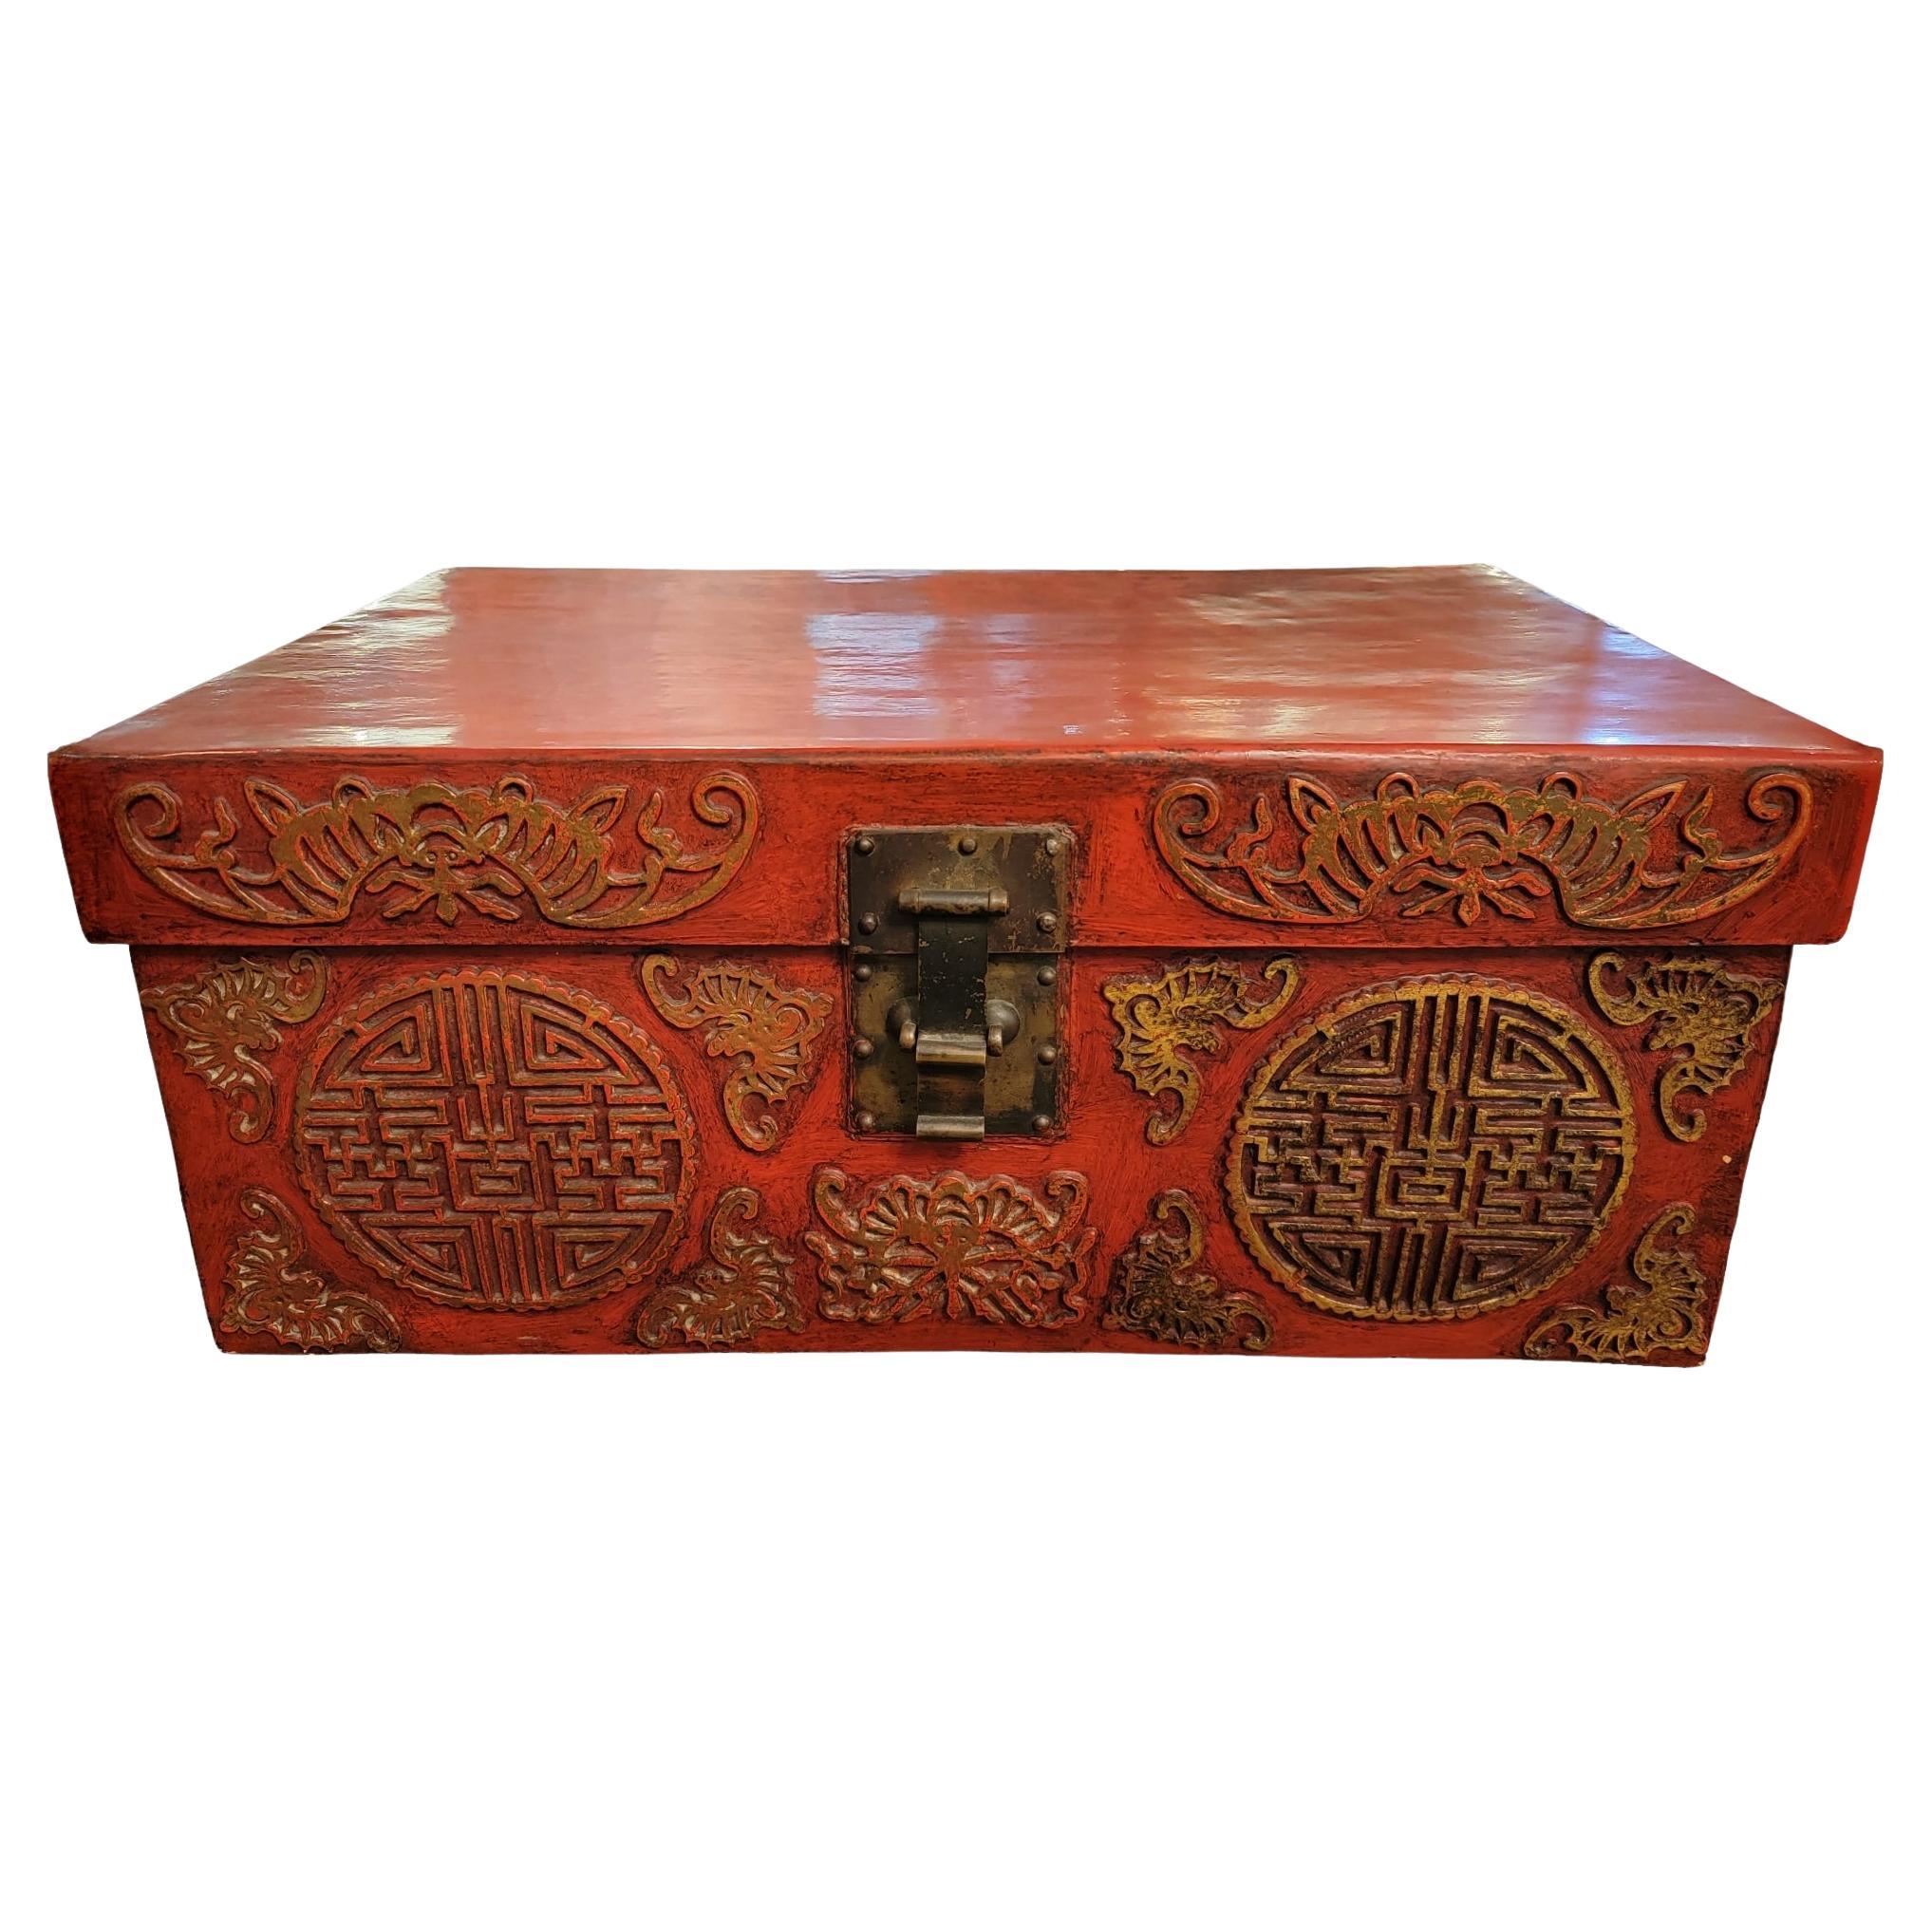 Late 18thC Chinese Leather Wooden Trunk